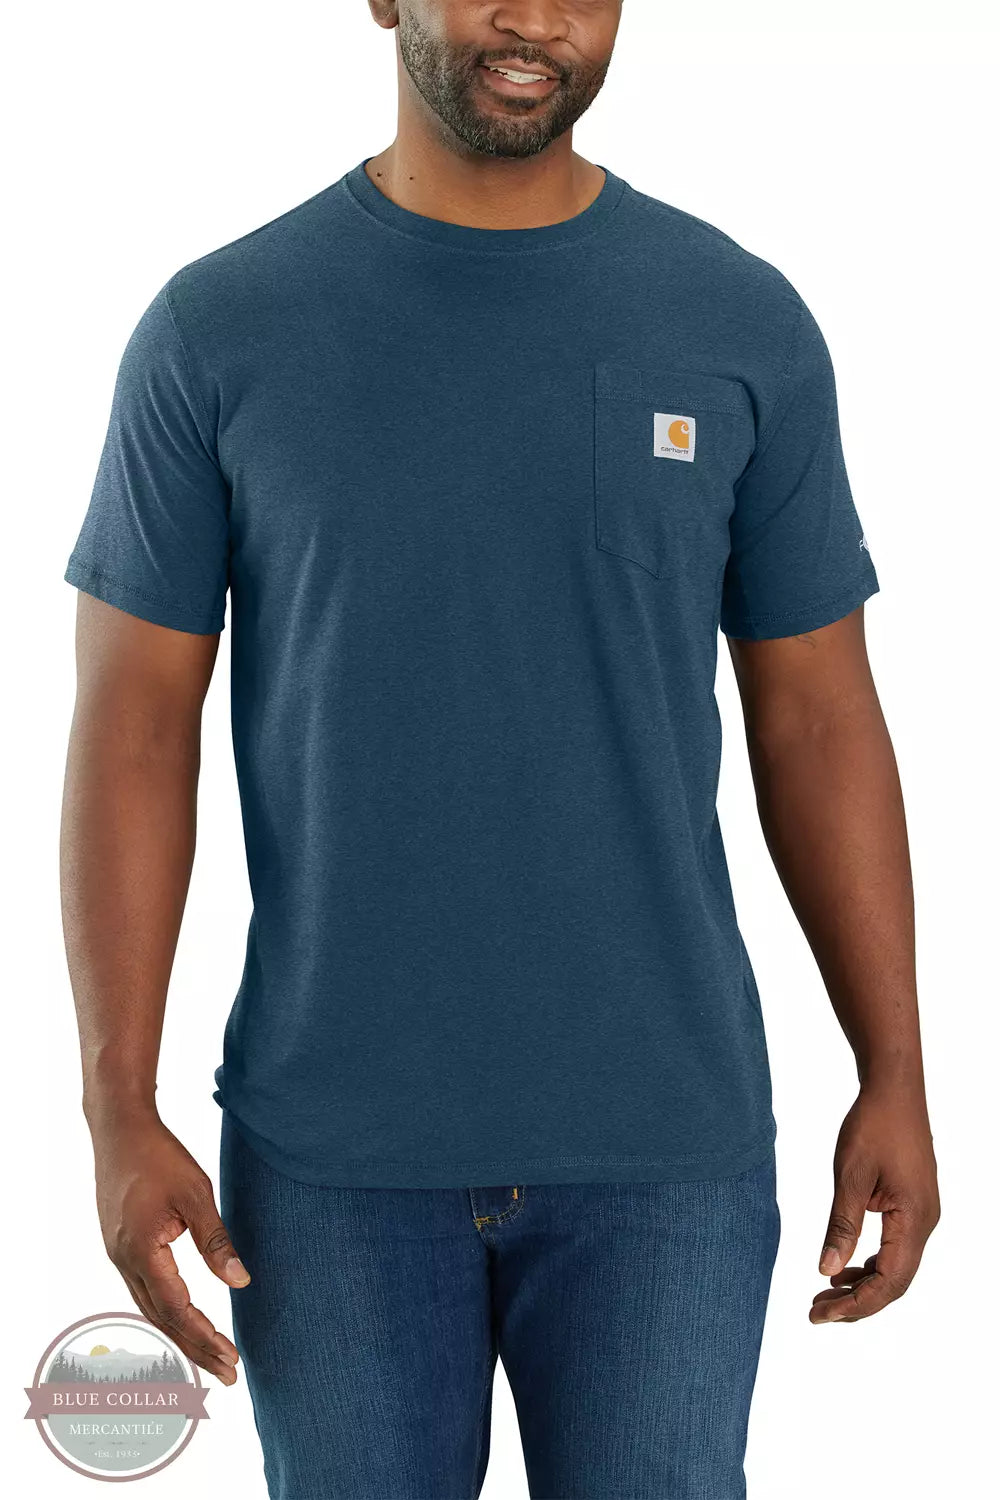 Carhartt 106652 Force Relaxed Fit Midweight Short Sleeve T-Shirt Light Huron Heather Front View